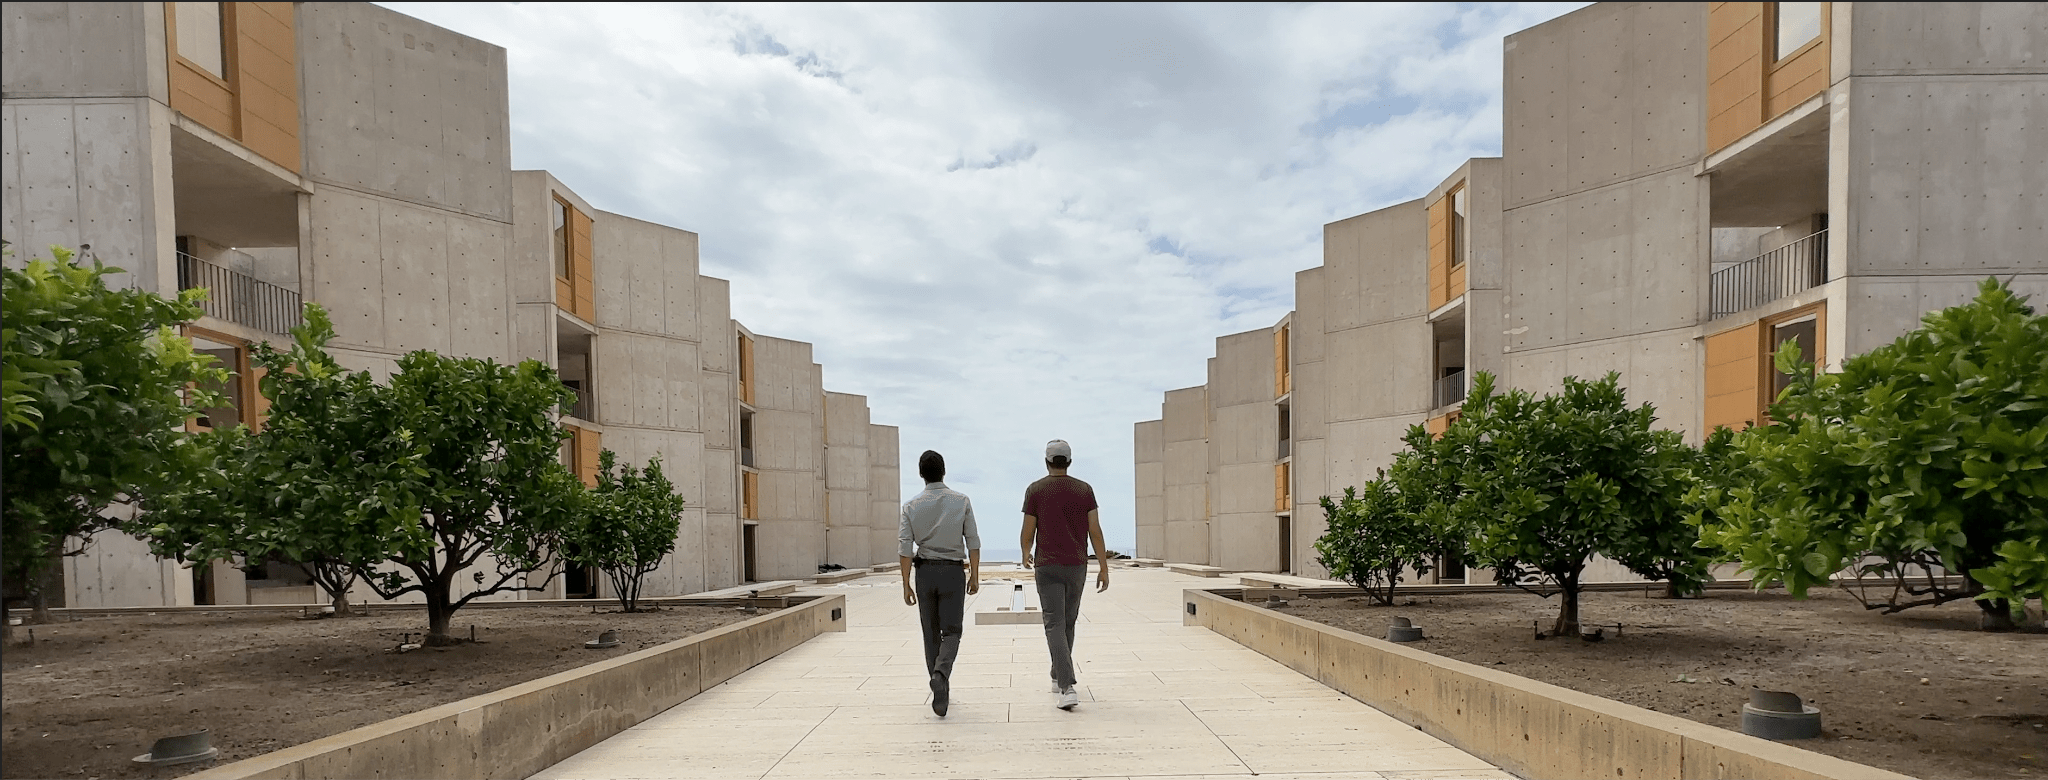 Two people walking down a path in front of a building.